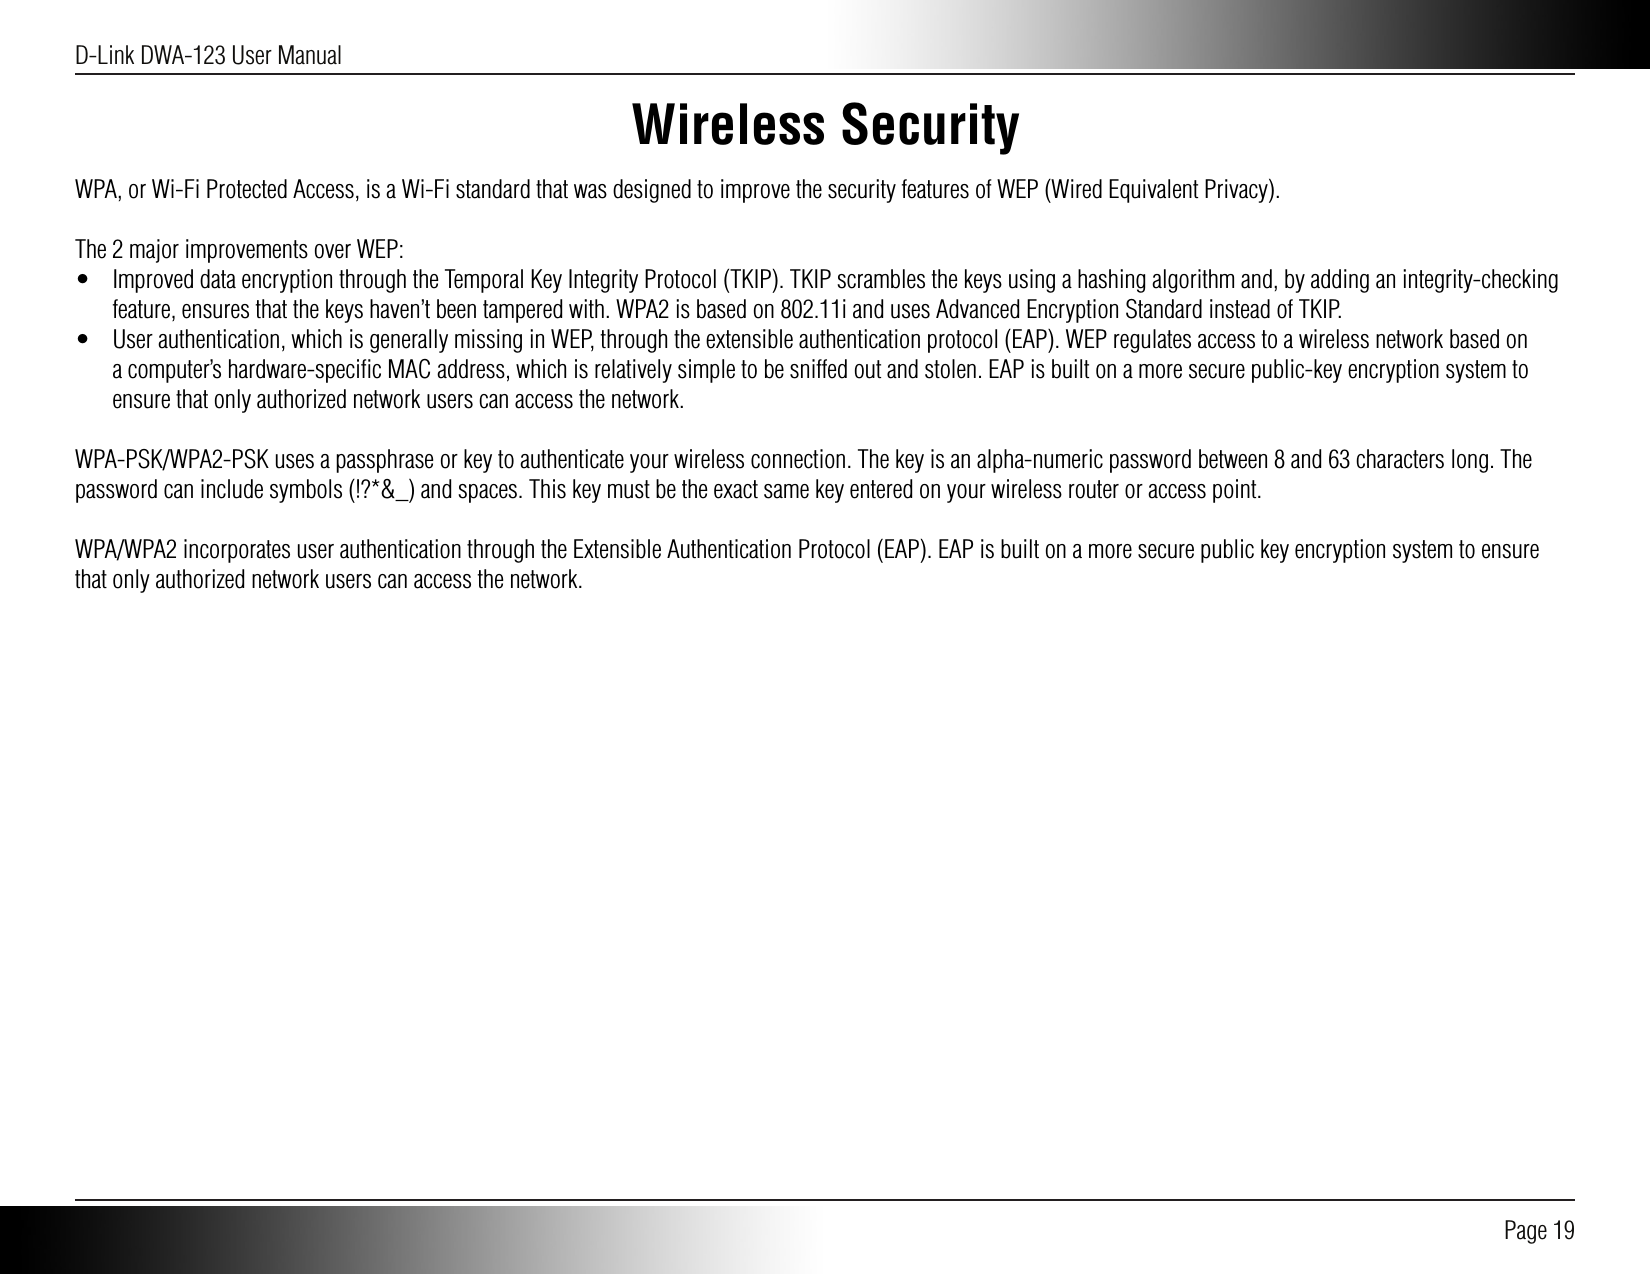 D-Link DWA-123 User Manual Page 19Wireless SecurityWPA, or Wi-Fi Protected Access, is a Wi-Fi standard that was designed to improve the security features of WEP (Wired Equivalent Privacy).The 2 major improvements over WEP:•  Improved data encryption through the Temporal Key Integrity Protocol (TKIP). TKIP scrambles the keys using a hashing algorithm and, by adding an integrity-checking feature, ensures that the keys haven’t been tampered with. WPA2 is based on 802.11i and uses Advanced Encryption Standard instead of TKIP.•  User authentication, which is generally missing in WEP, through the extensible authentication protocol (EAP). WEP regulates access to a wireless network based on a computer’s hardware-speciﬁc MAC address, which is relatively simple to be sniffed out and stolen. EAP is built on a more secure public-key encryption system to ensure that only authorized network users can access the network.WPA-PSK/WPA2-PSK uses a passphrase or key to authenticate your wireless connection. The key is an alpha-numeric password between 8 and 63 characters long. The password can include symbols (!?*&amp;_) and spaces. This key must be the exact same key entered on your wireless router or access point.WPA/WPA2 incorporates user authentication through the Extensible Authentication Protocol (EAP). EAP is built on a more secure public key encryption system to ensure that only authorized network users can access the network.